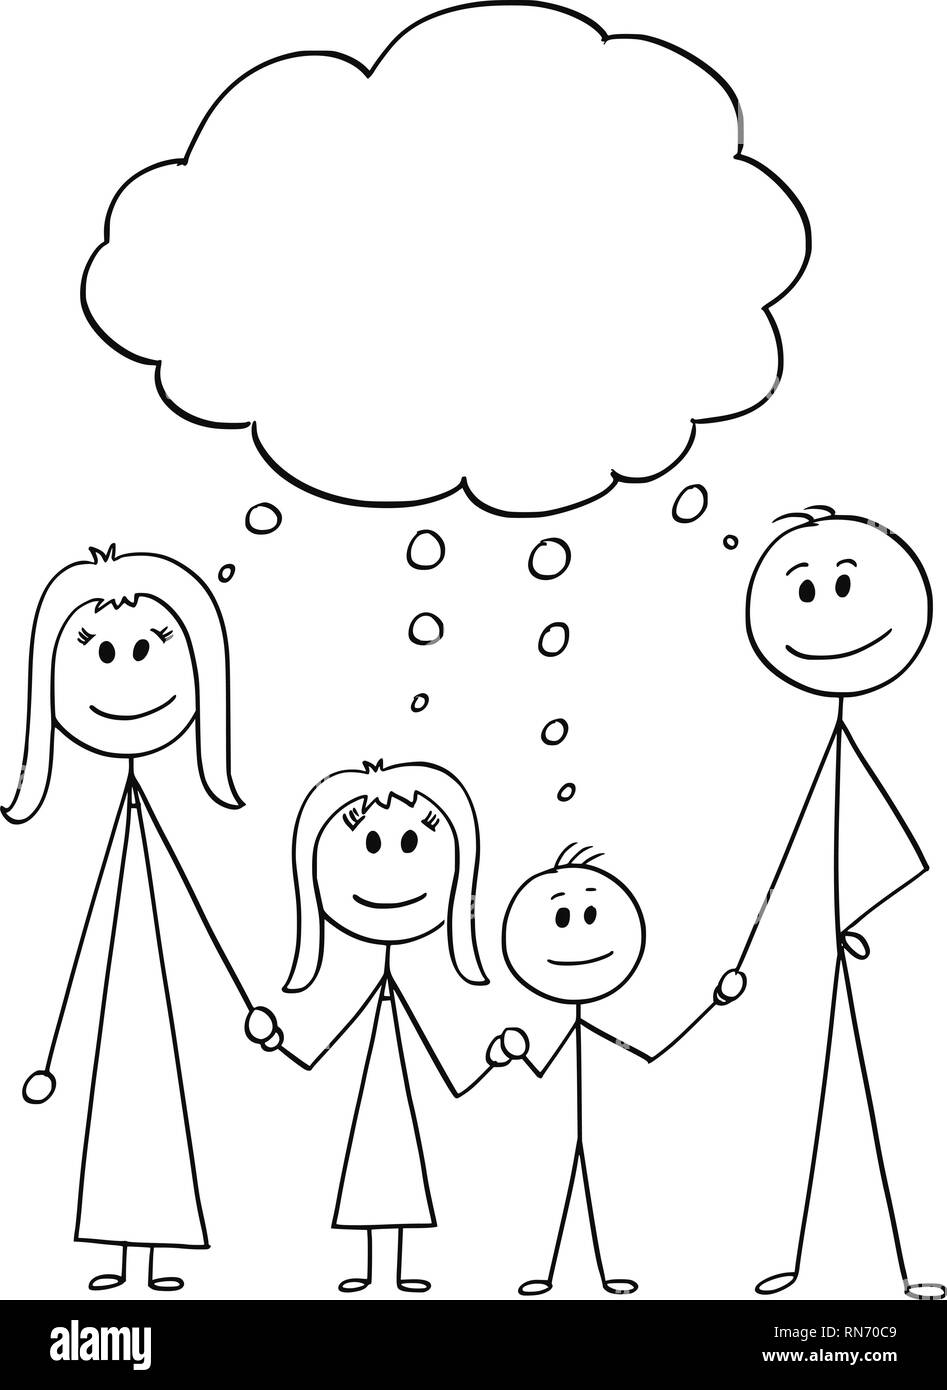 Cartoon of Family, Couple of Man and Woman and Two Children With Empty Speech Balloon Stock Vector